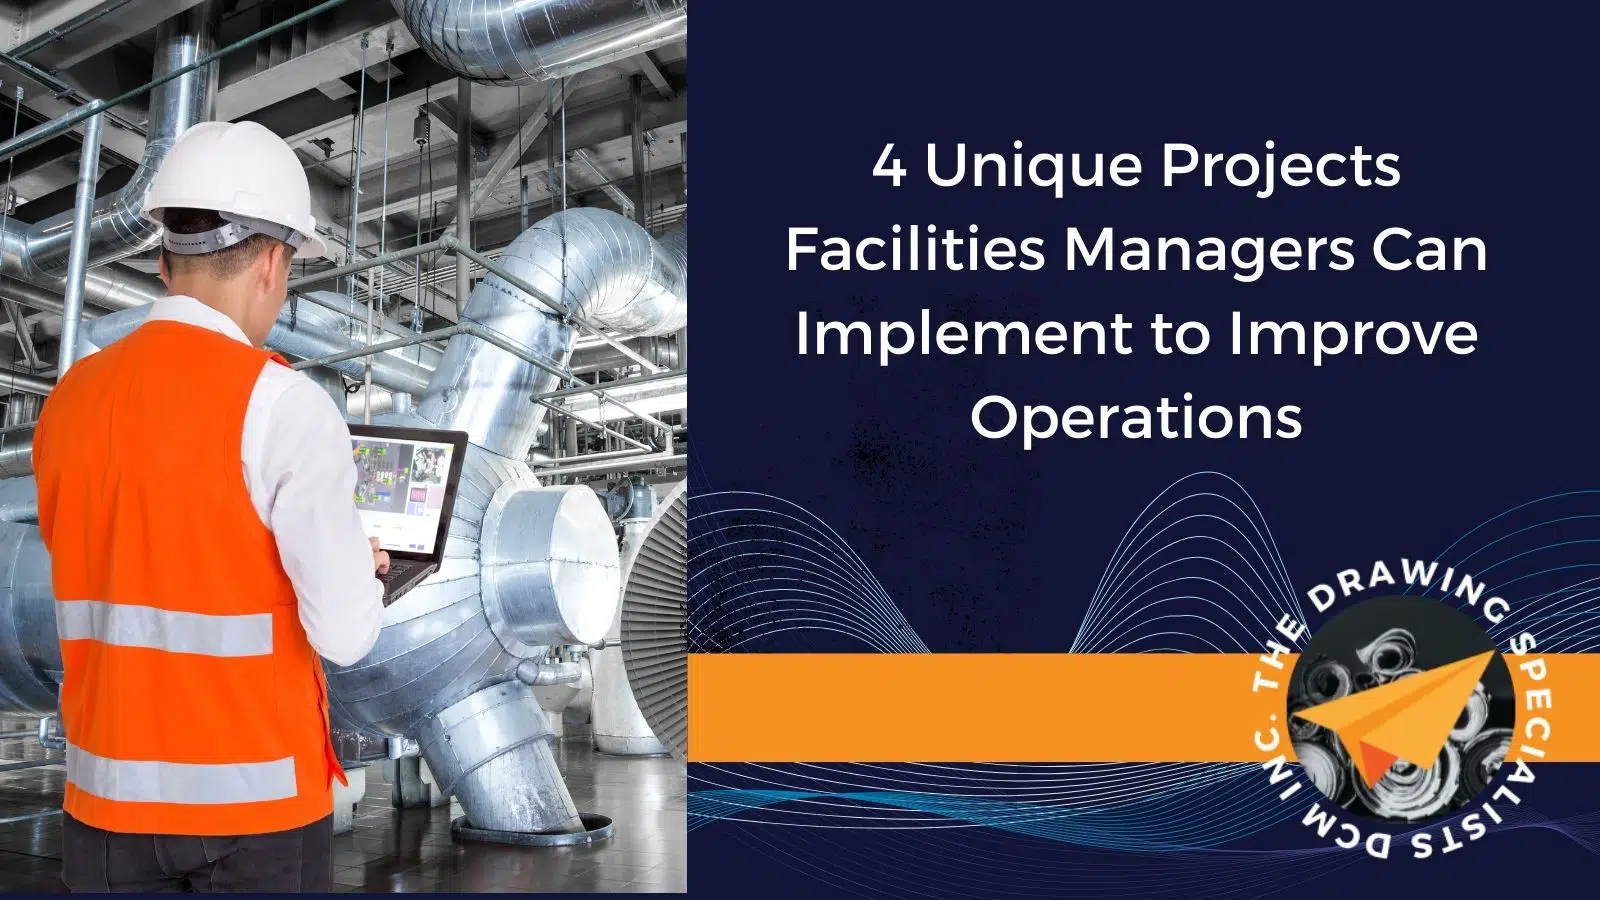 4 Unique Projects Facilities Managers Can Implement to Improve Operations